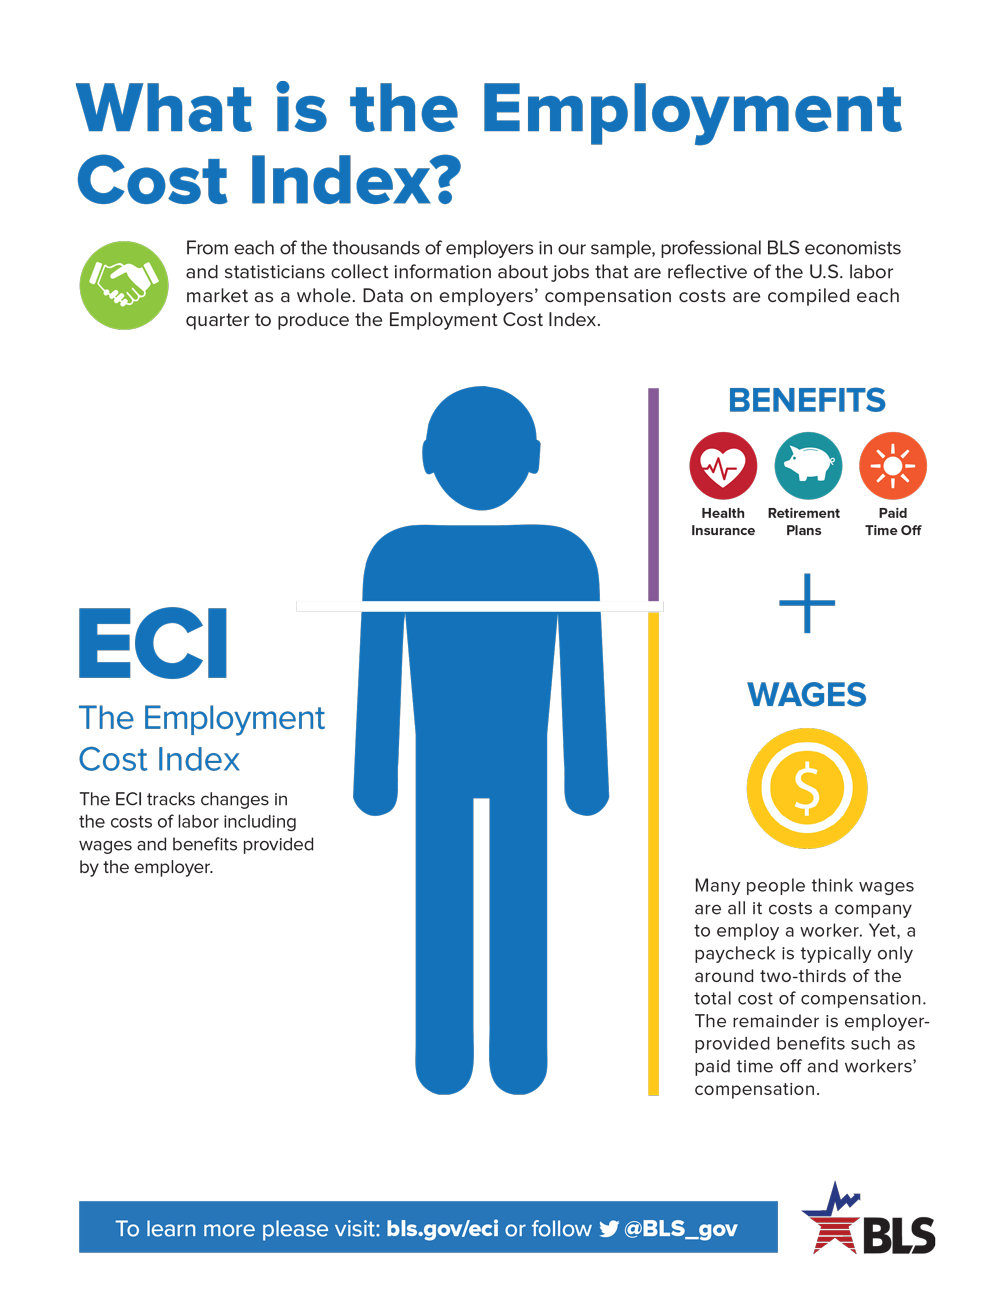 What is the Employment Cost Index